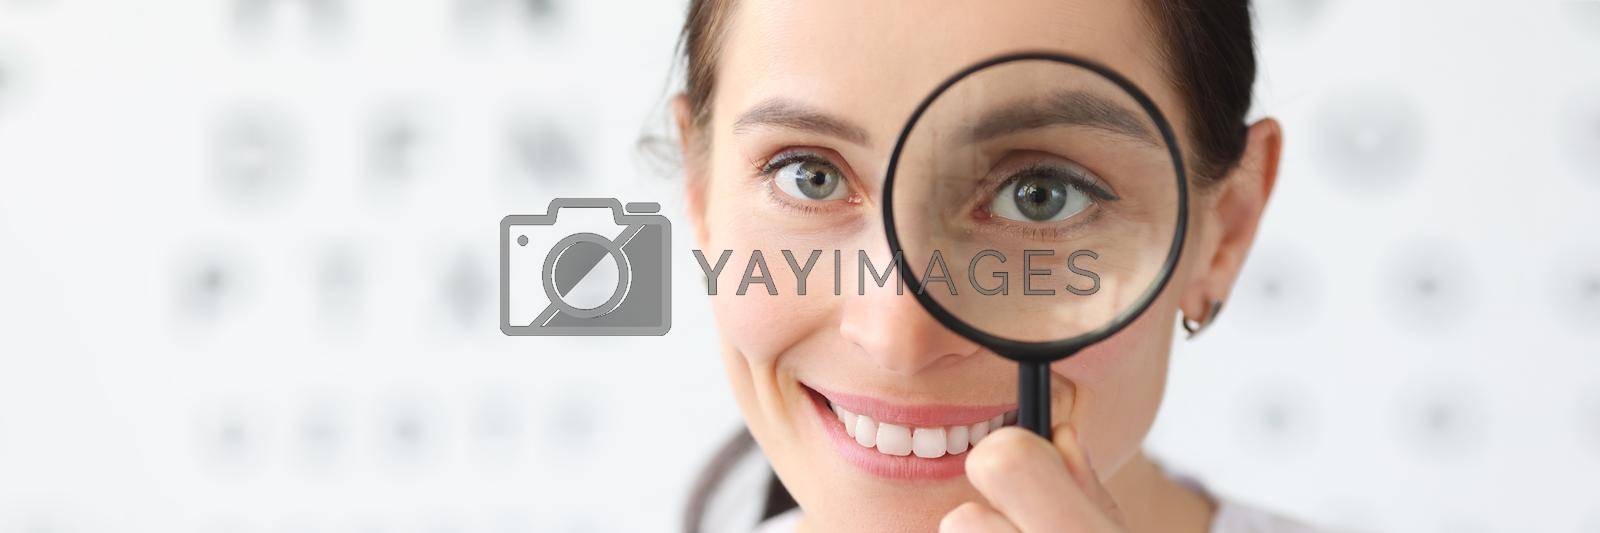 Royalty free image of Woman optometrist holding magnifying glass in eyes against background of vision examination table by kuprevich